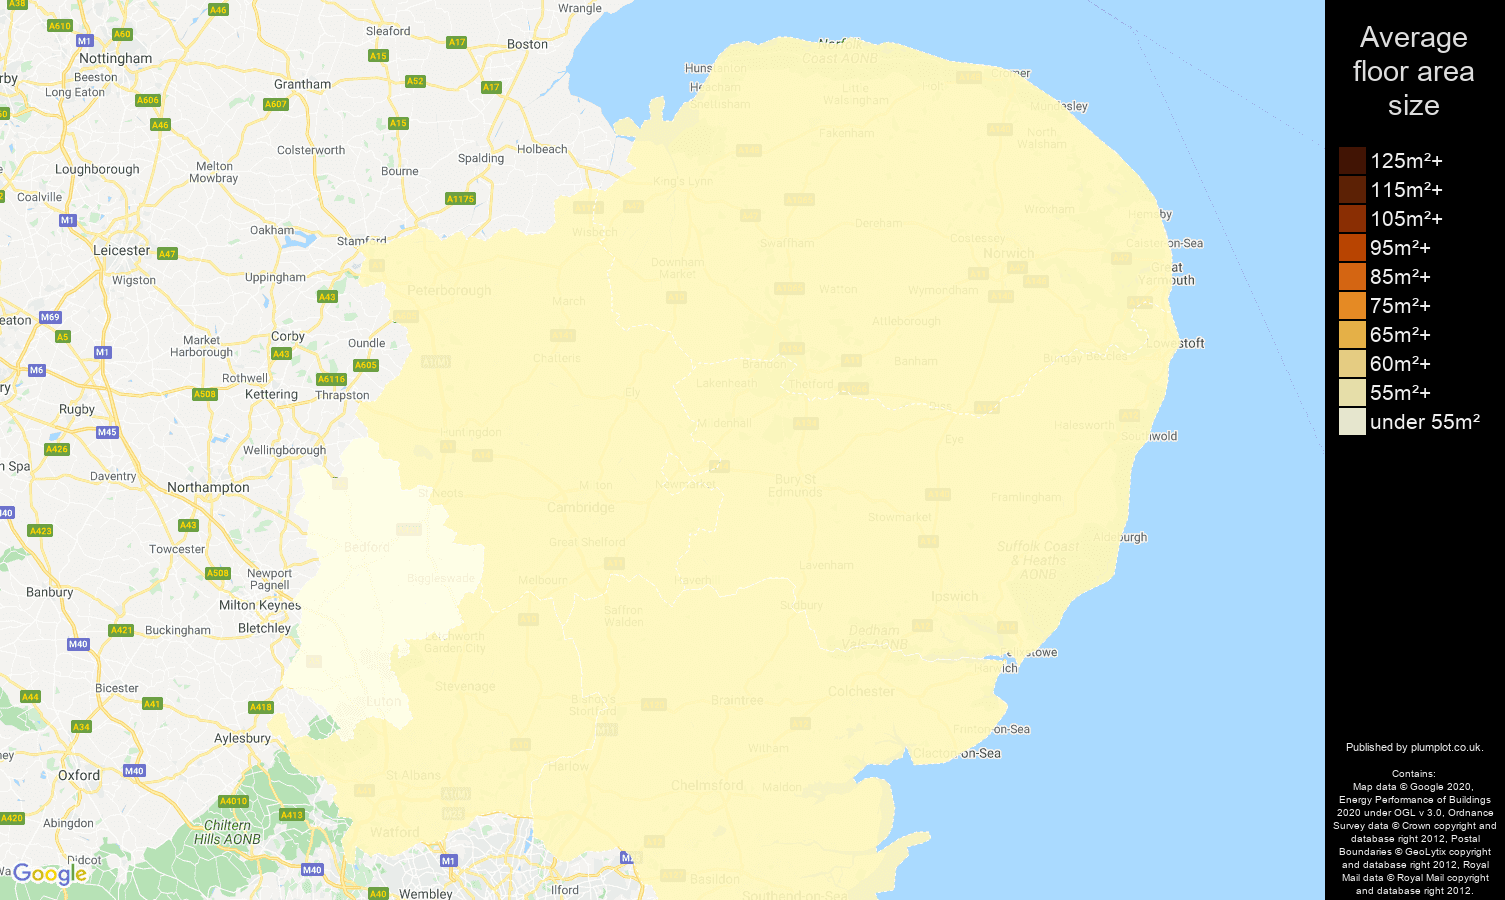 East of England map of average floor area size of flats